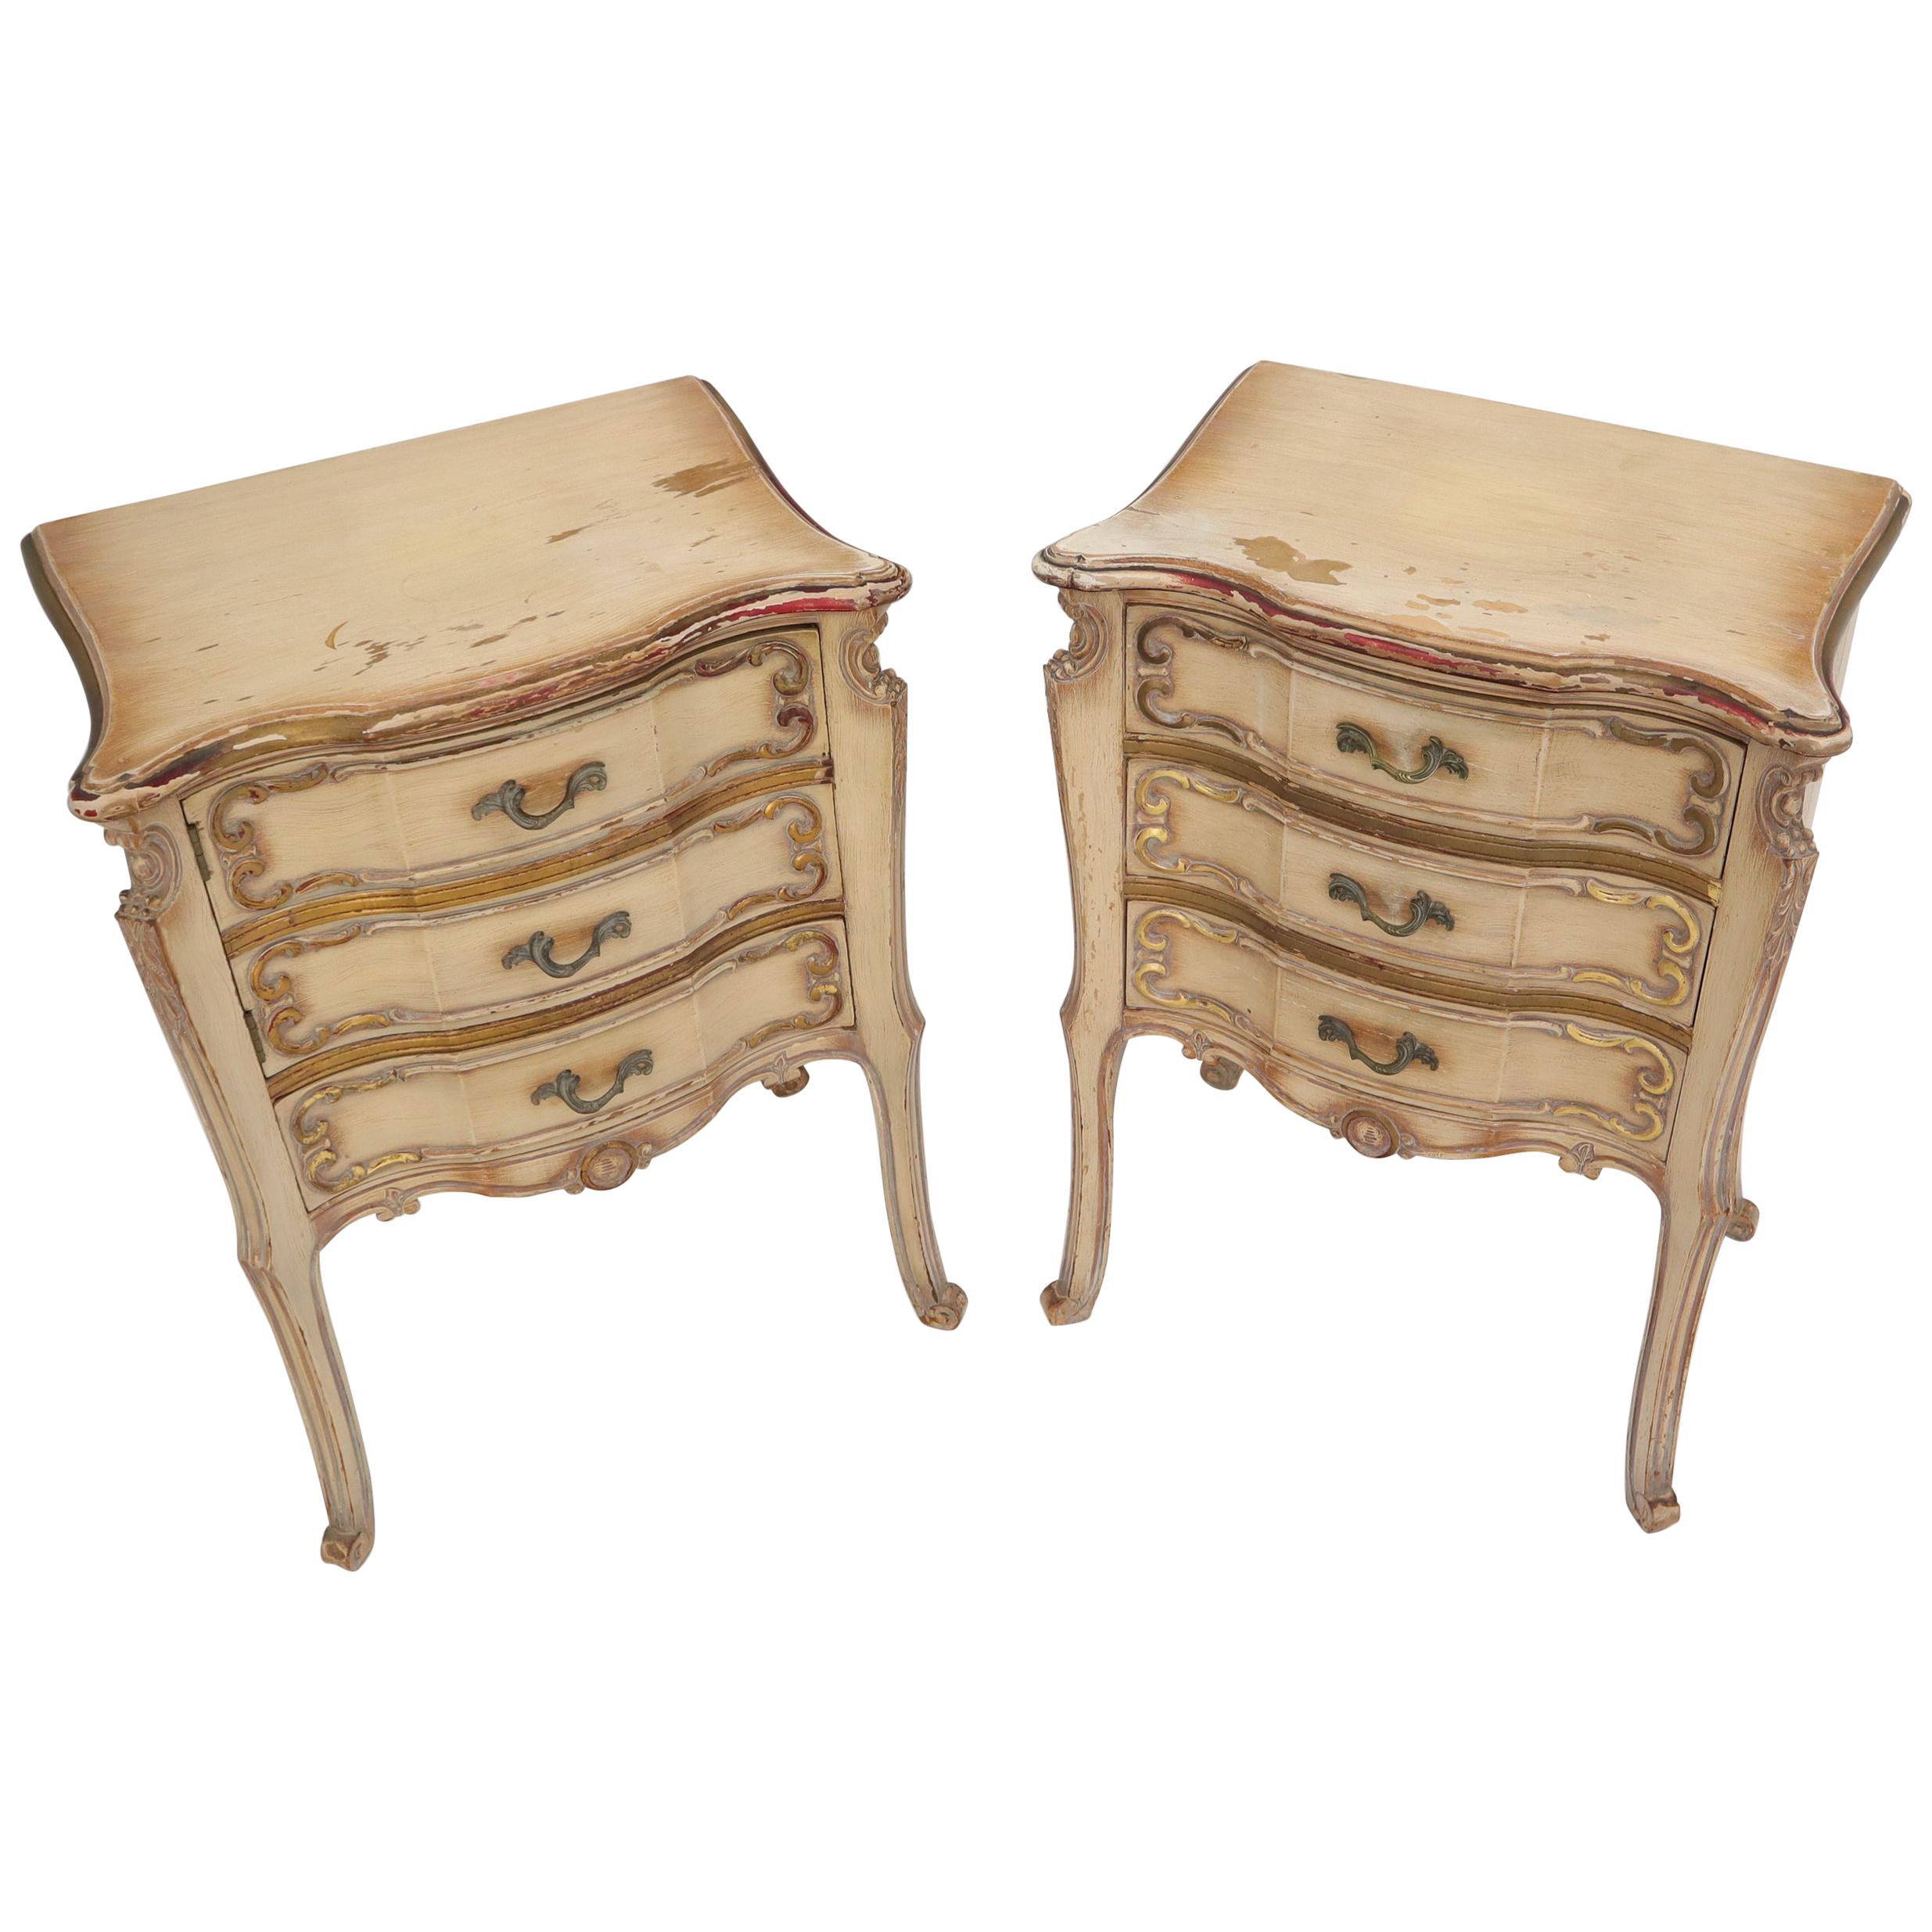 Pair of Shabby Chic French Provincial End Side Tables Nightstands White & Gold